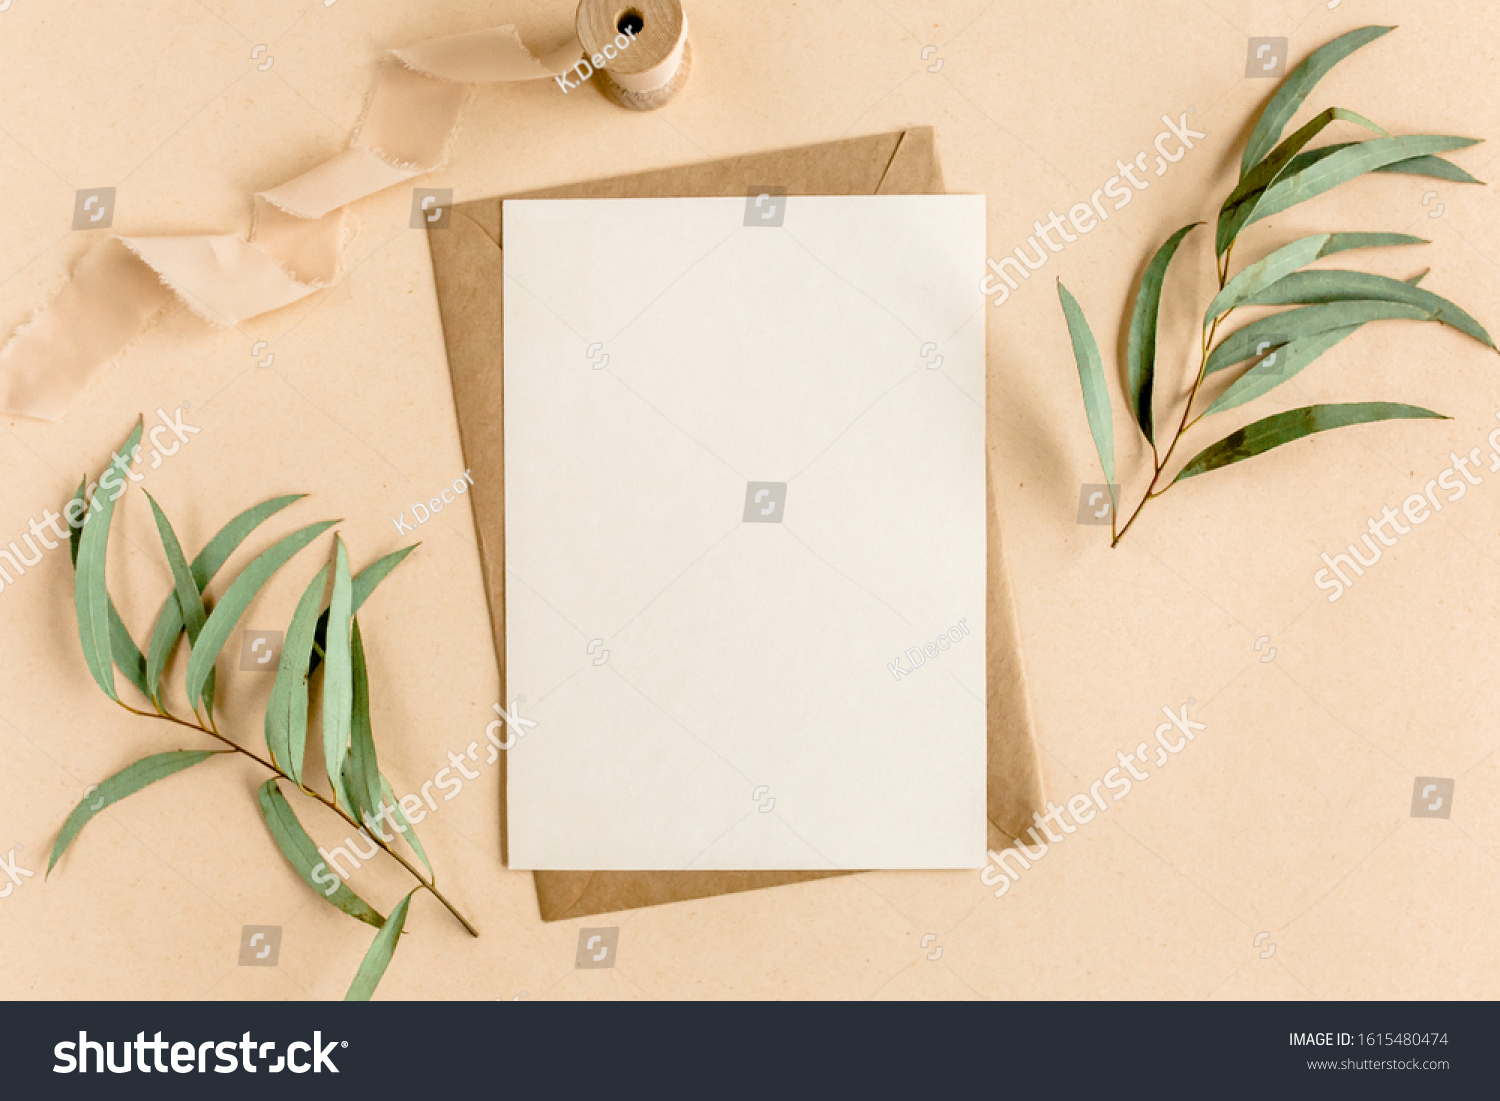 Mockup invitation, blank greeting card and green leaves eucalyptus. Flat lay, top view. #1615480474